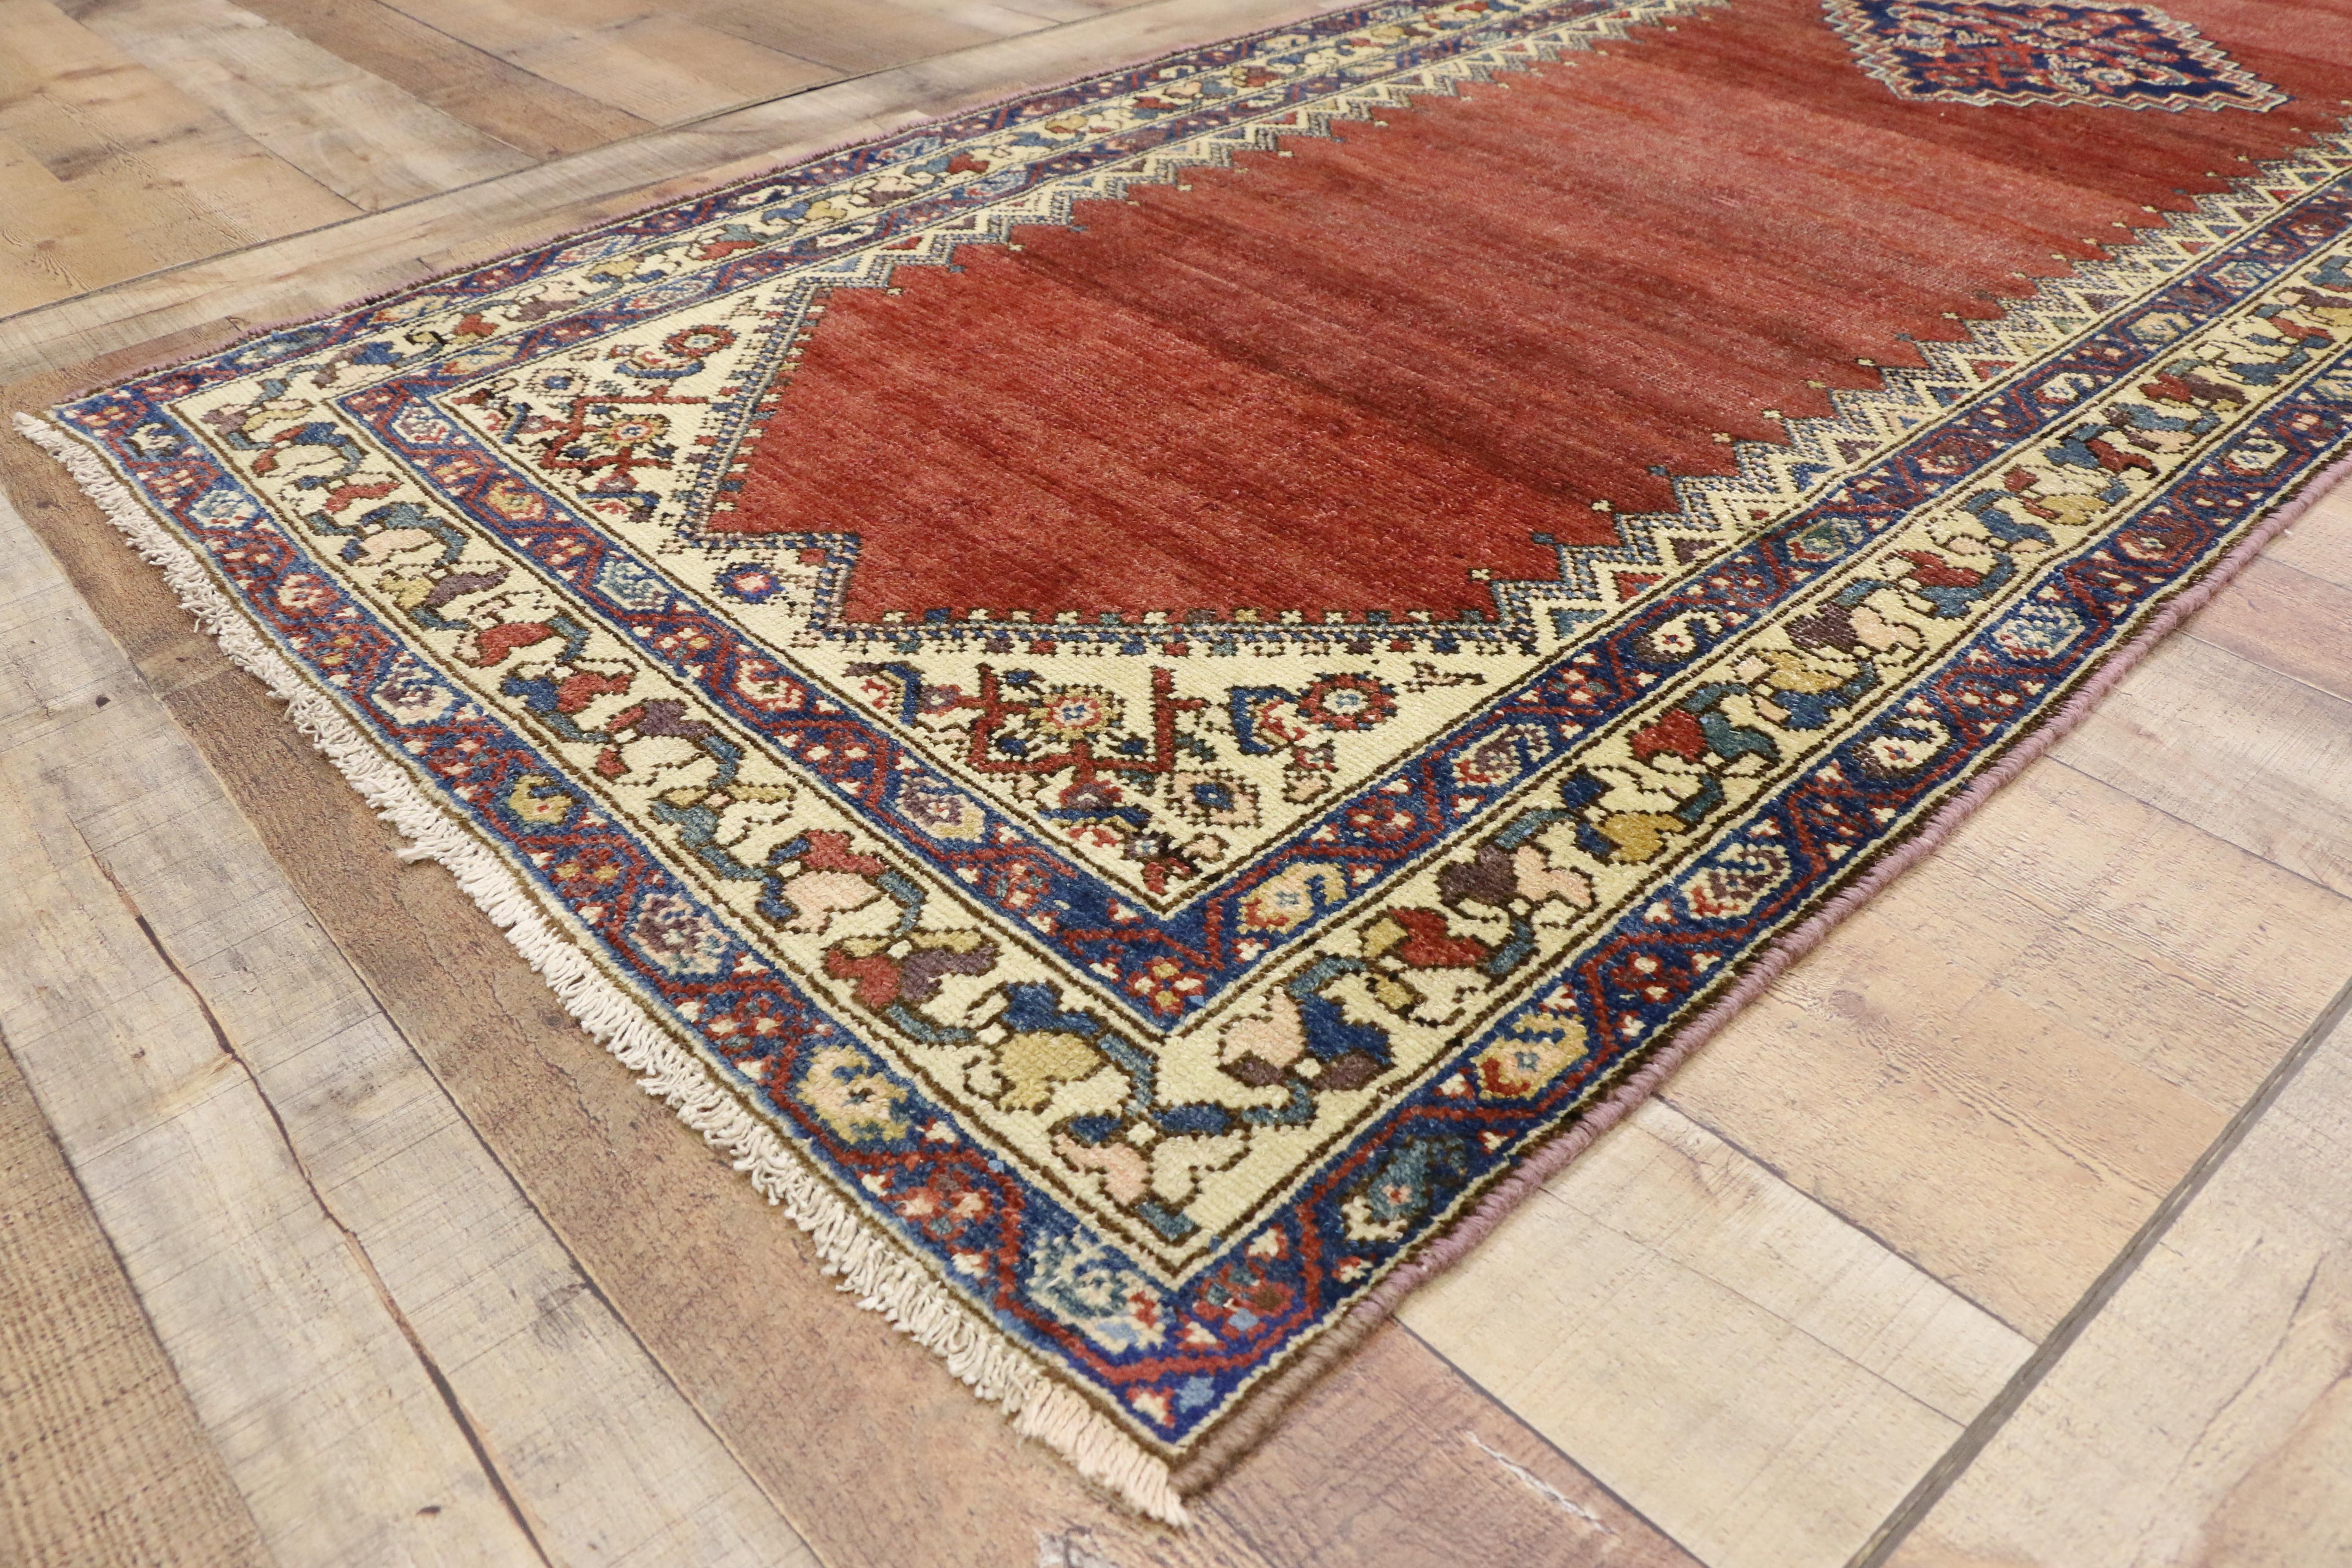 76543, antique Persian Malayer runner, hallway runner. This hand knotted wool antique Persian Malayer runner features a stepped lozenge center medallion floating on an abrashed red field. Rows of small pyramids with cruciform tops line the edges,